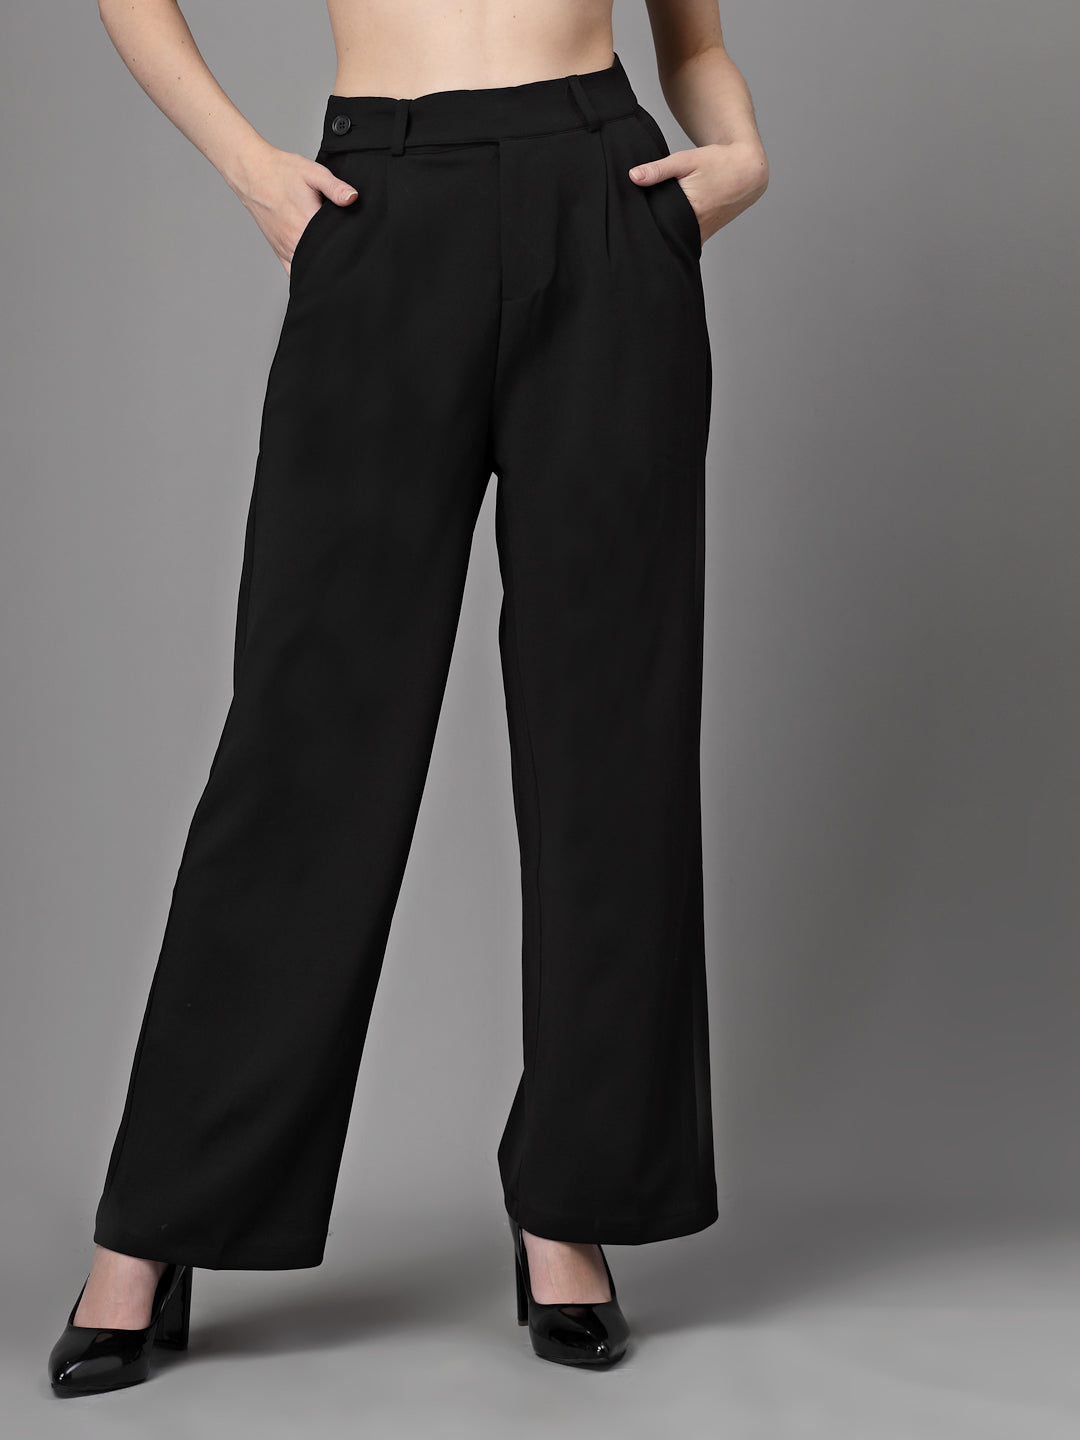 Work to Weekend in High Waisted Black Pants - Sydne Style | Black pants  work outfit, Work outfit, Black pants outfit